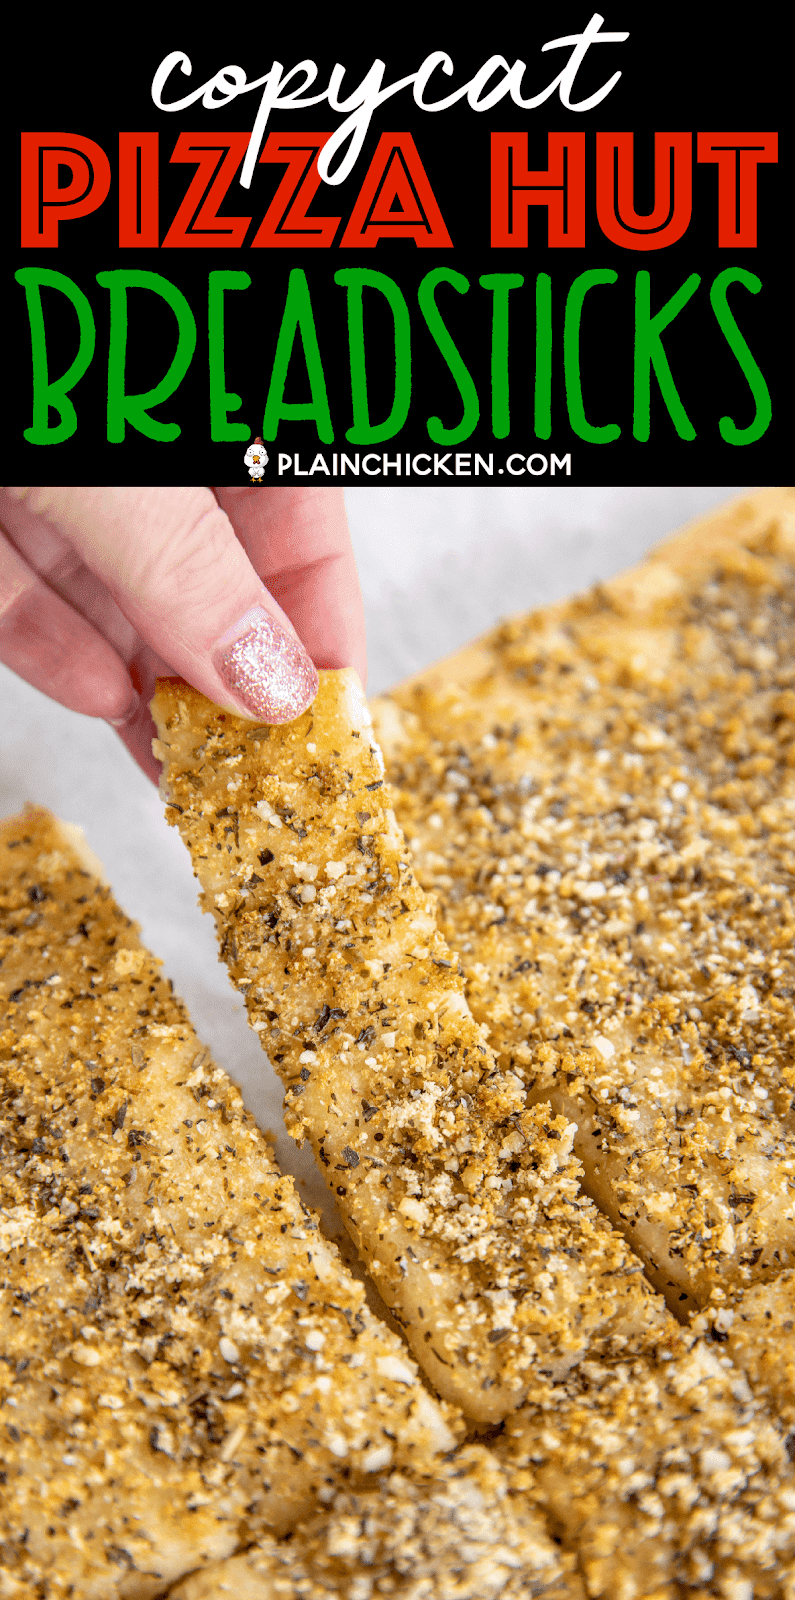 Copycat Pizza Hut Breadsticks - so easy to make and seriously delicious!!! Refrigerated pizza dough topped with parmesan cheese, garlic powder, salt, onion powder, oregano and basil. Dip in warm pizza sauce. Tastes just like the original! Ready to eat in under 20 minutes! #breadsticks #pizzahut #copycat